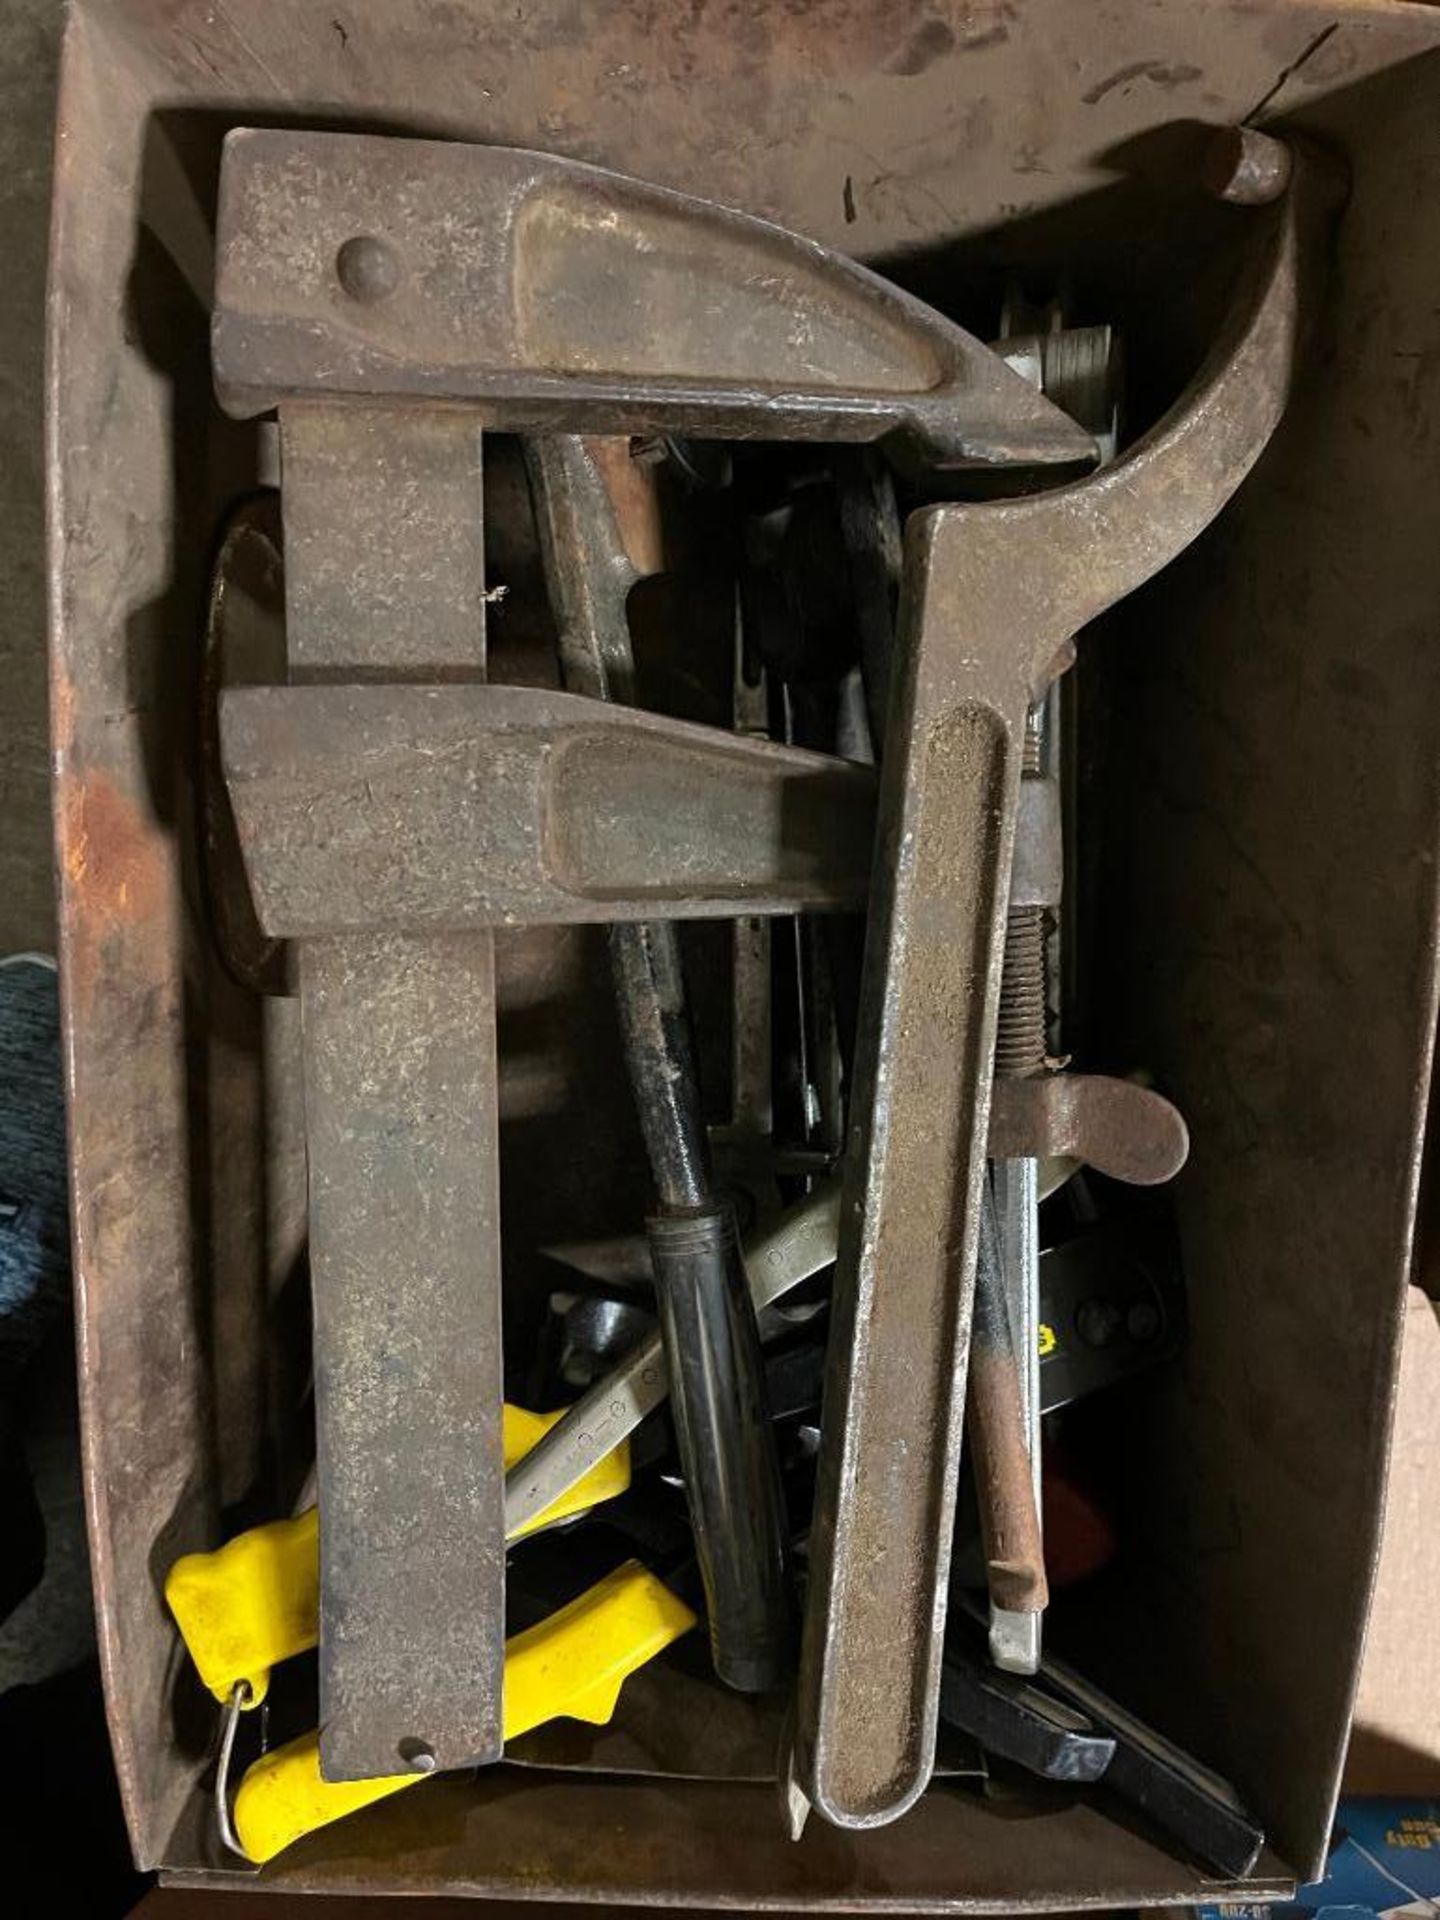 Bin of Tools; Hole Punch & Other Tools - Image 2 of 2